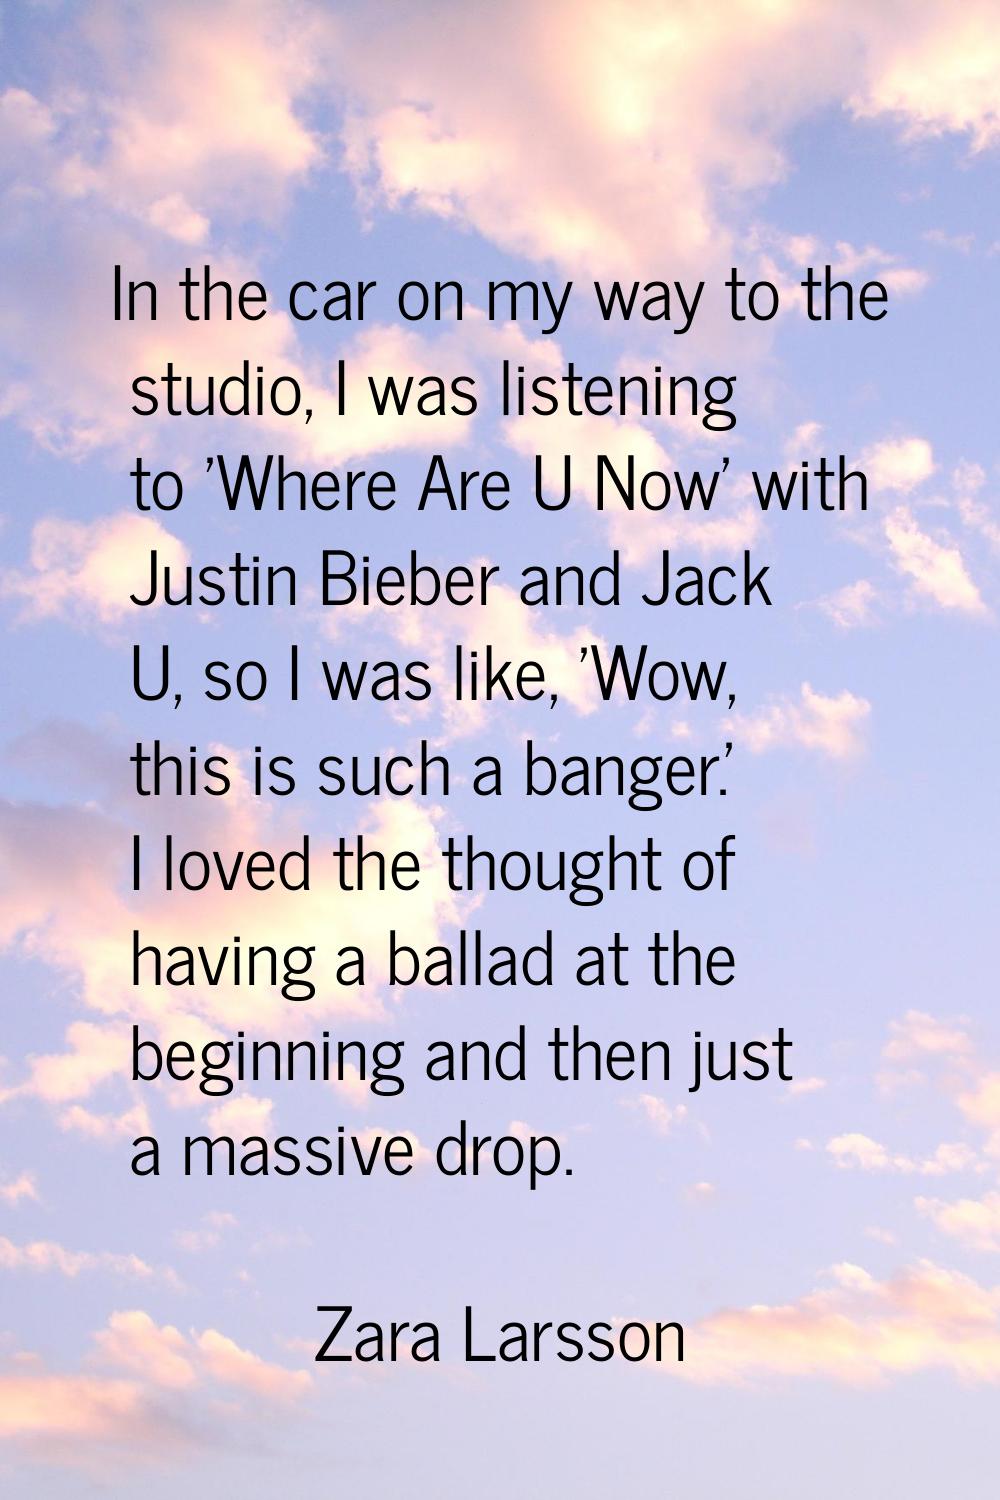 In the car on my way to the studio, I was listening to 'Where Are U Now' with Justin Bieber and Jac